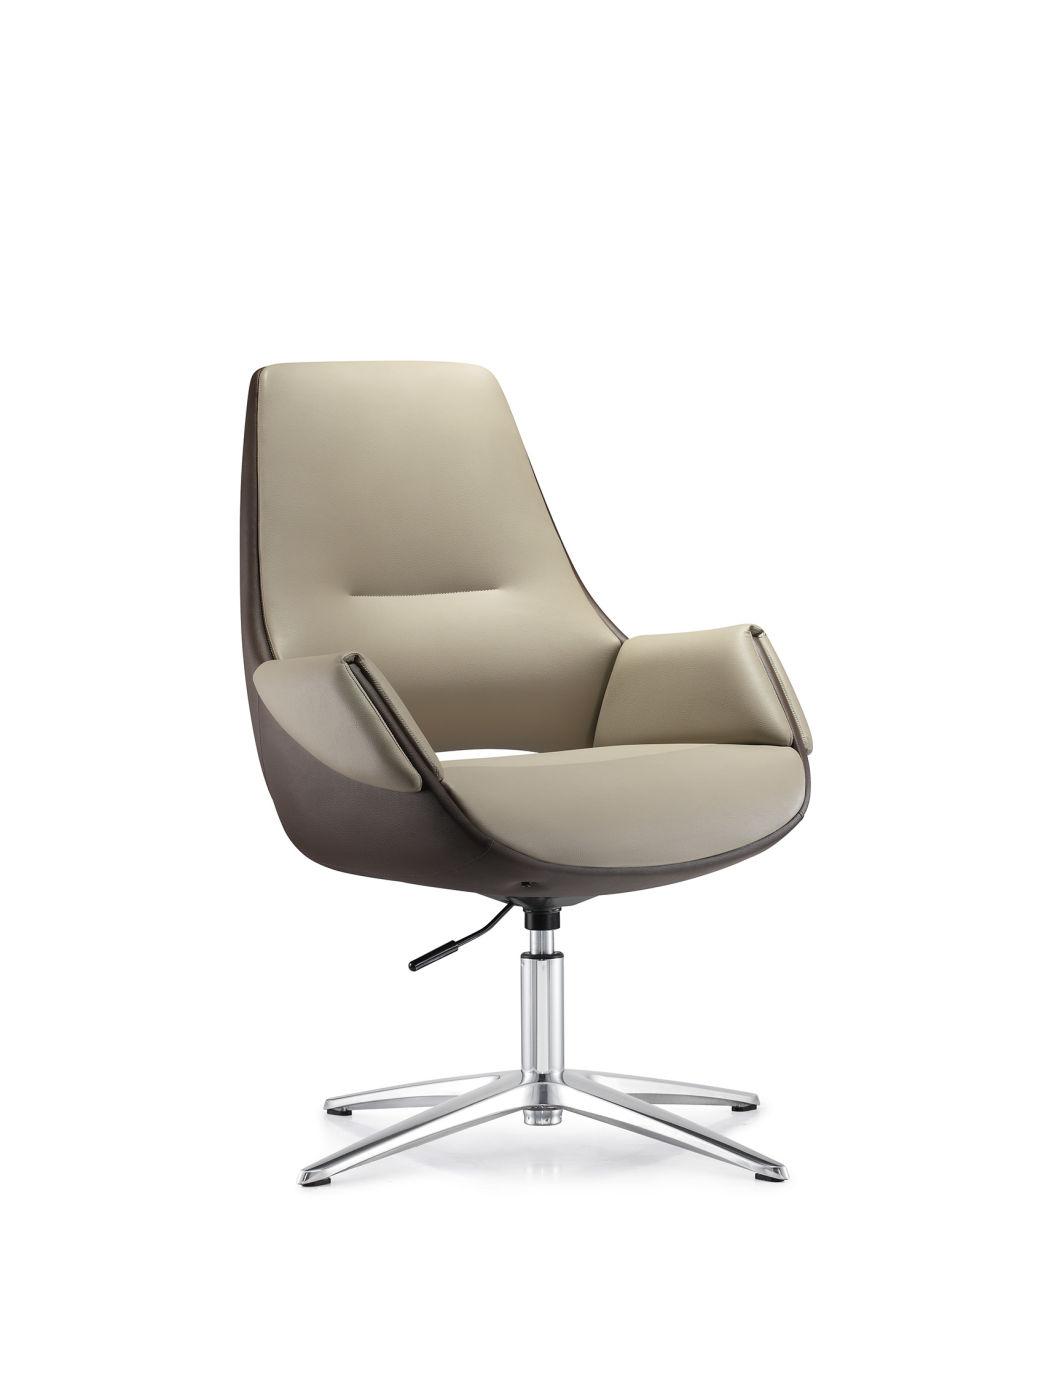 Wholesale Leather High Quality Office Home Executive Chair Conference Boss Ergonomic Swivel Meeting Chair